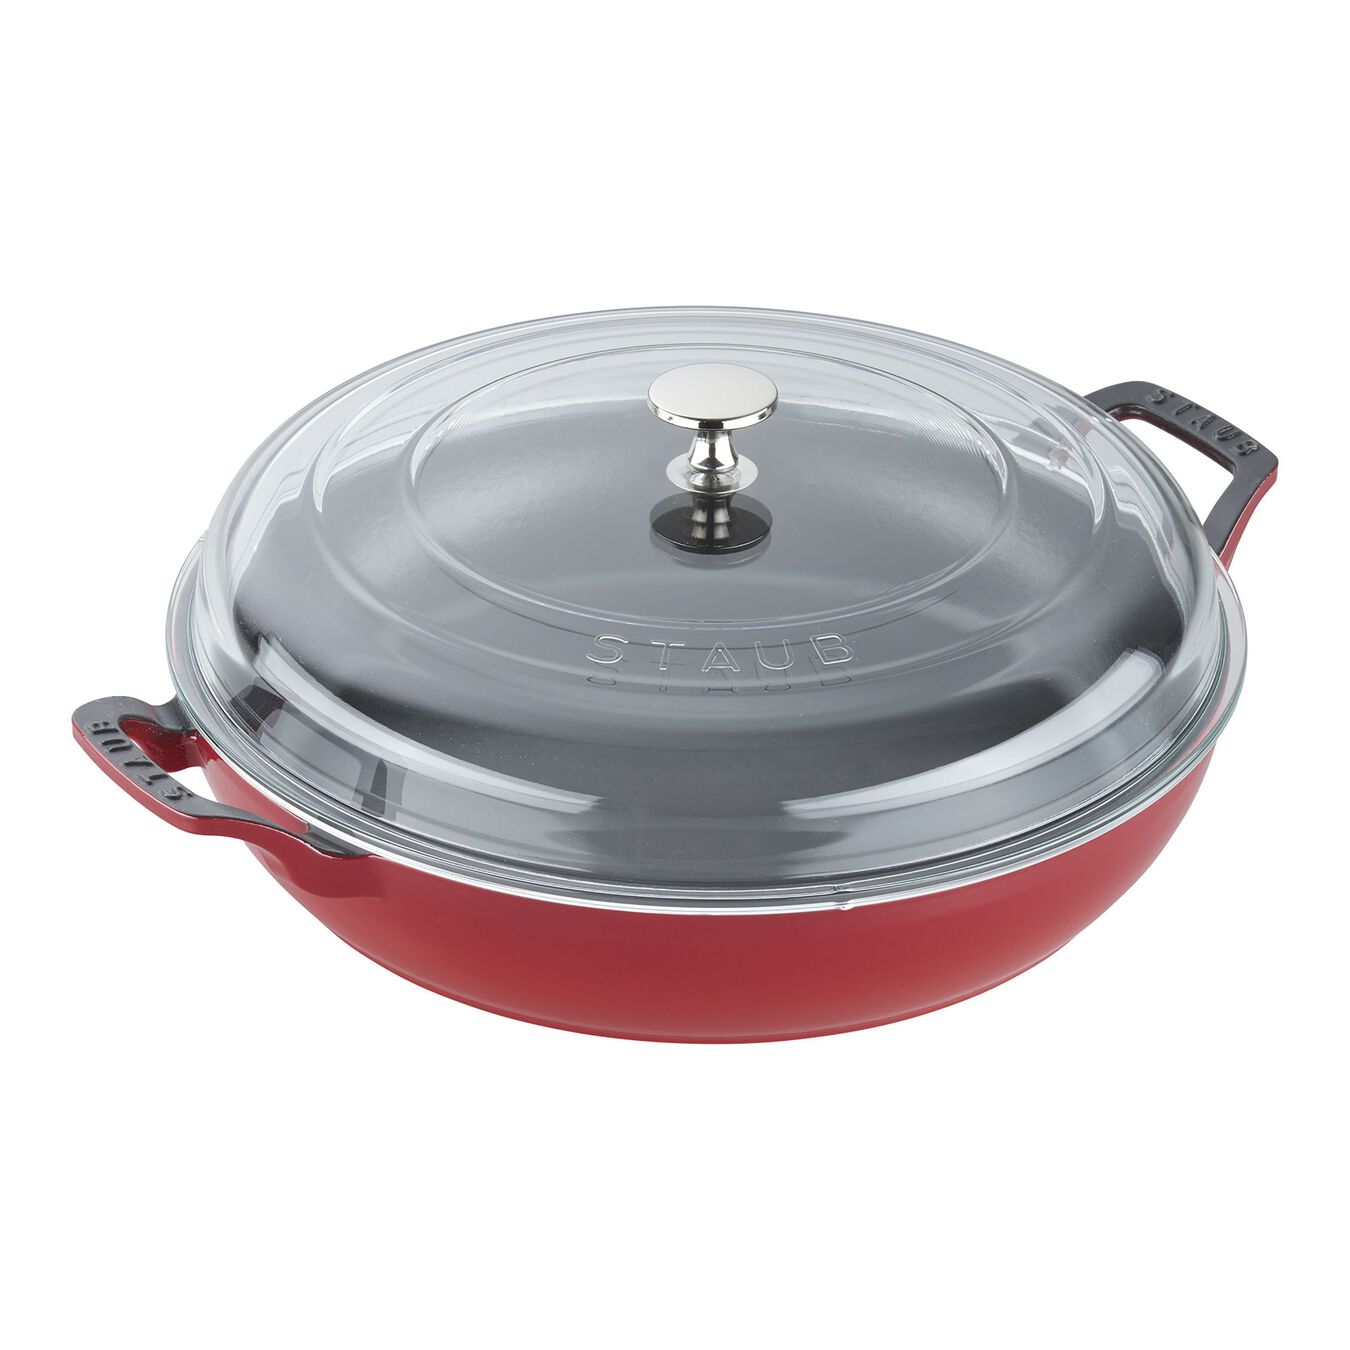 3.5 l cast iron round Saute pan with glass lid, cherry - Visual Imperfections,,large 1